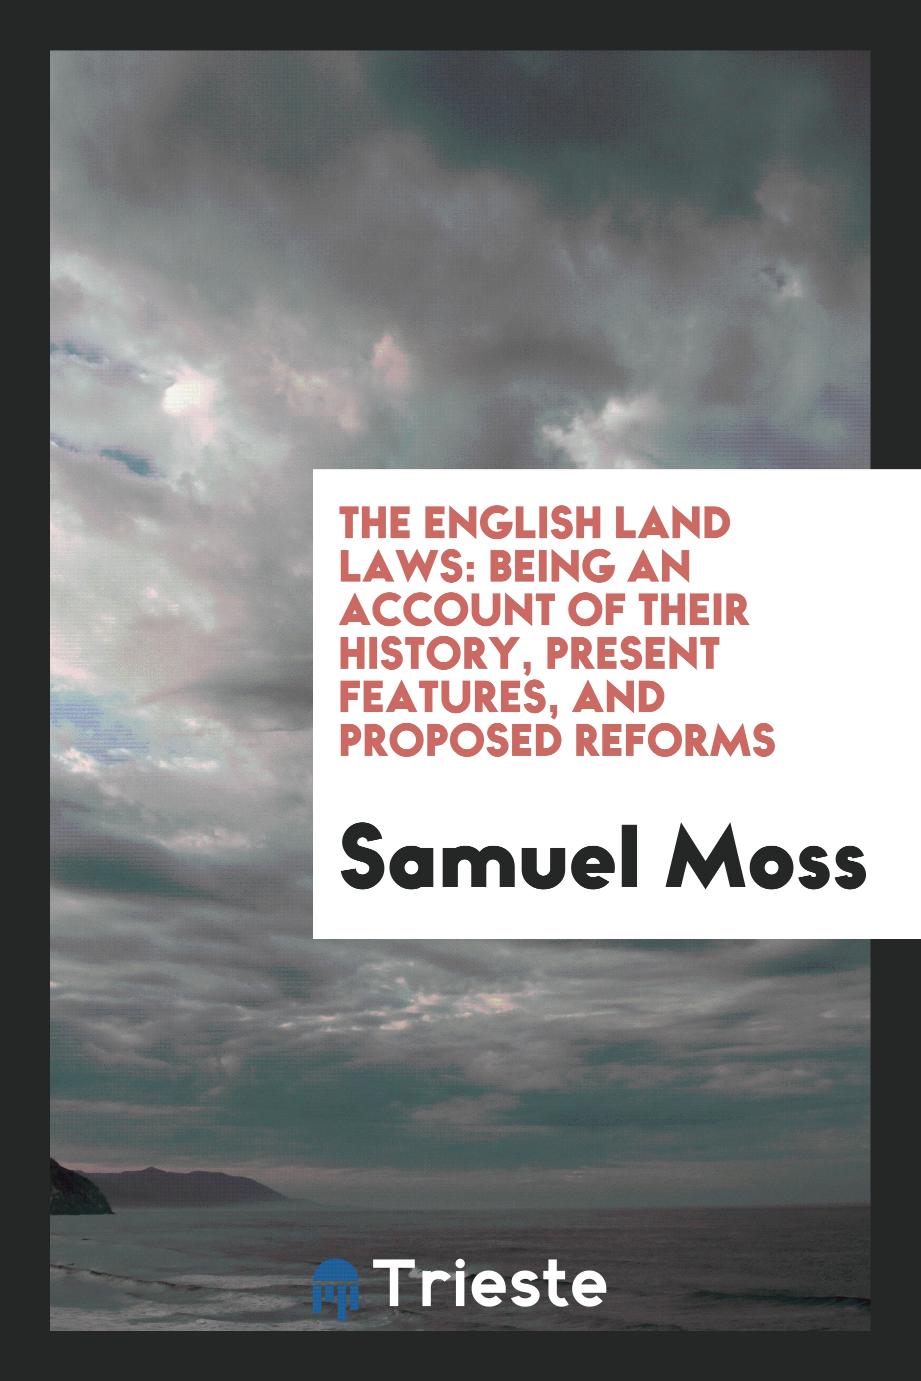 The English Land Laws: Being an Account of Their History, Present Features, and Proposed Reforms